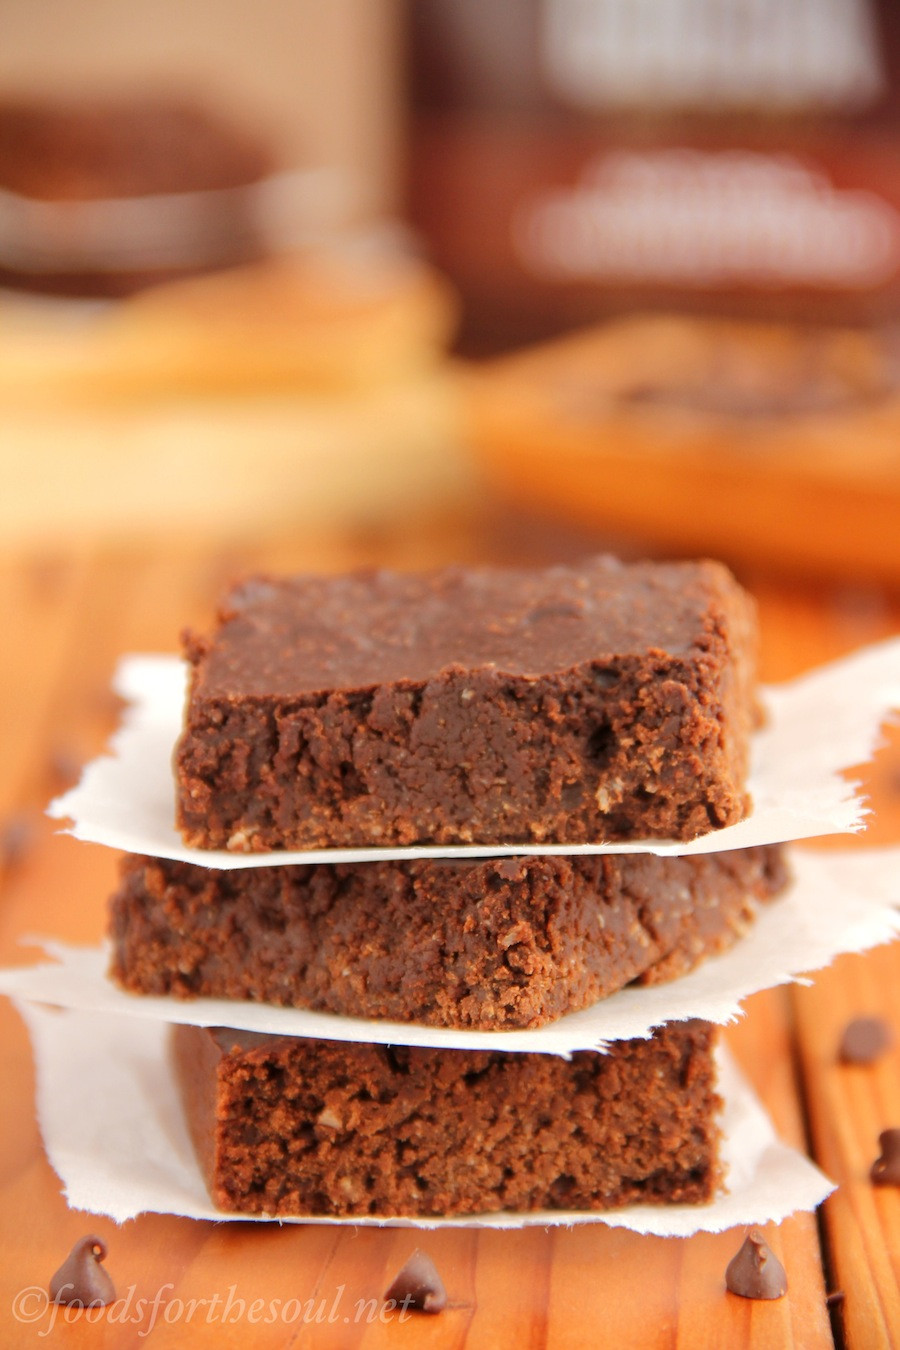 Healthy Brownie Recipe With Cocoa Powder
 The Ultimate Healthy Fudgy Cocoa Brownies